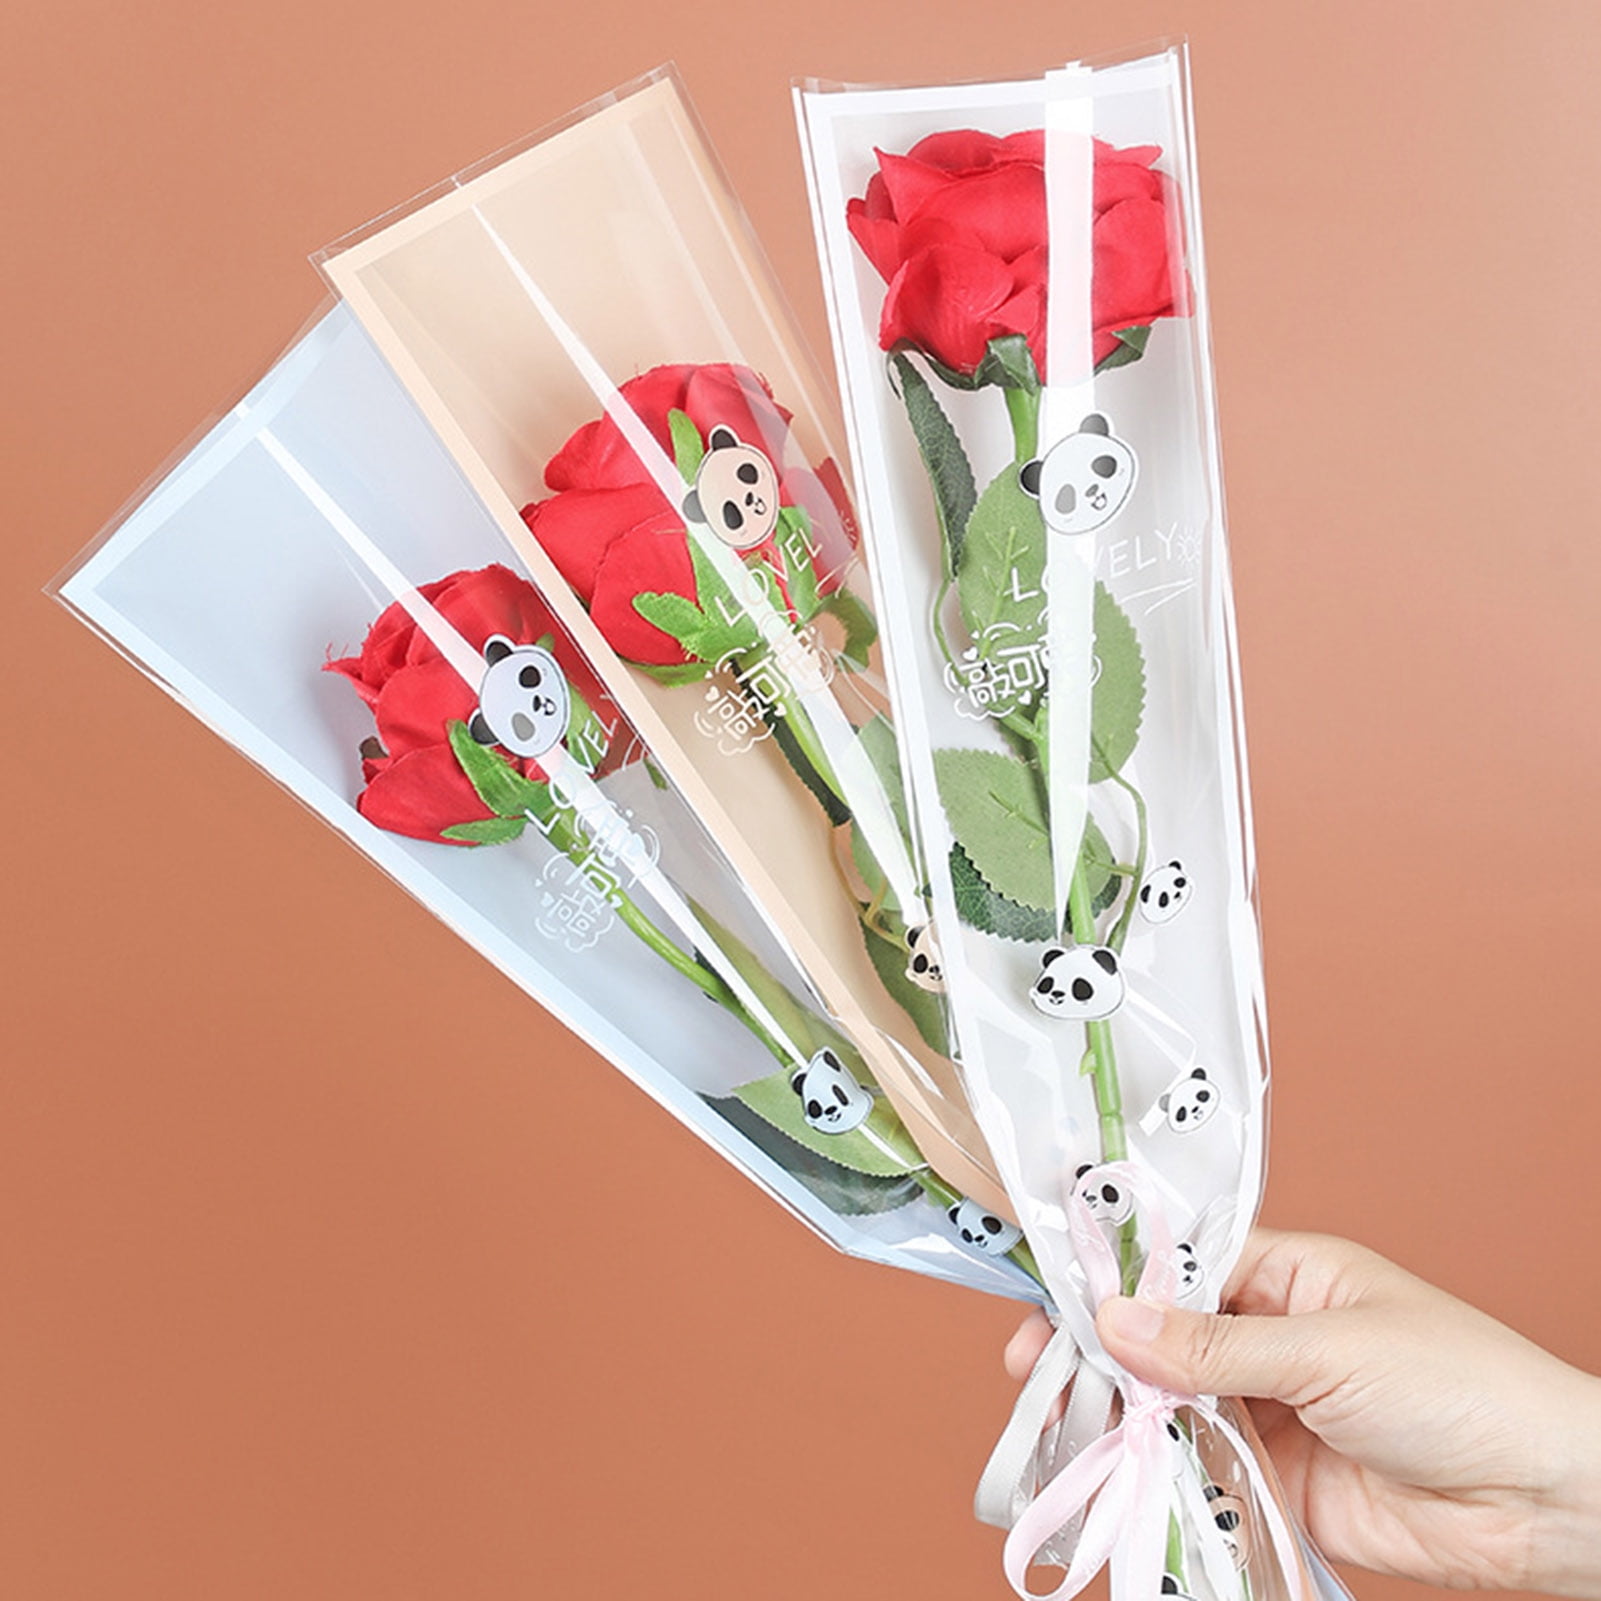  FOIMAS 120pcs Single Flower Sleeves Wrapping Bags Single Rose  Florist Bouquet Packaging Bags for Floral Arrangement Supply Wedding  Valentine's Day Mother's Day : Health & Household